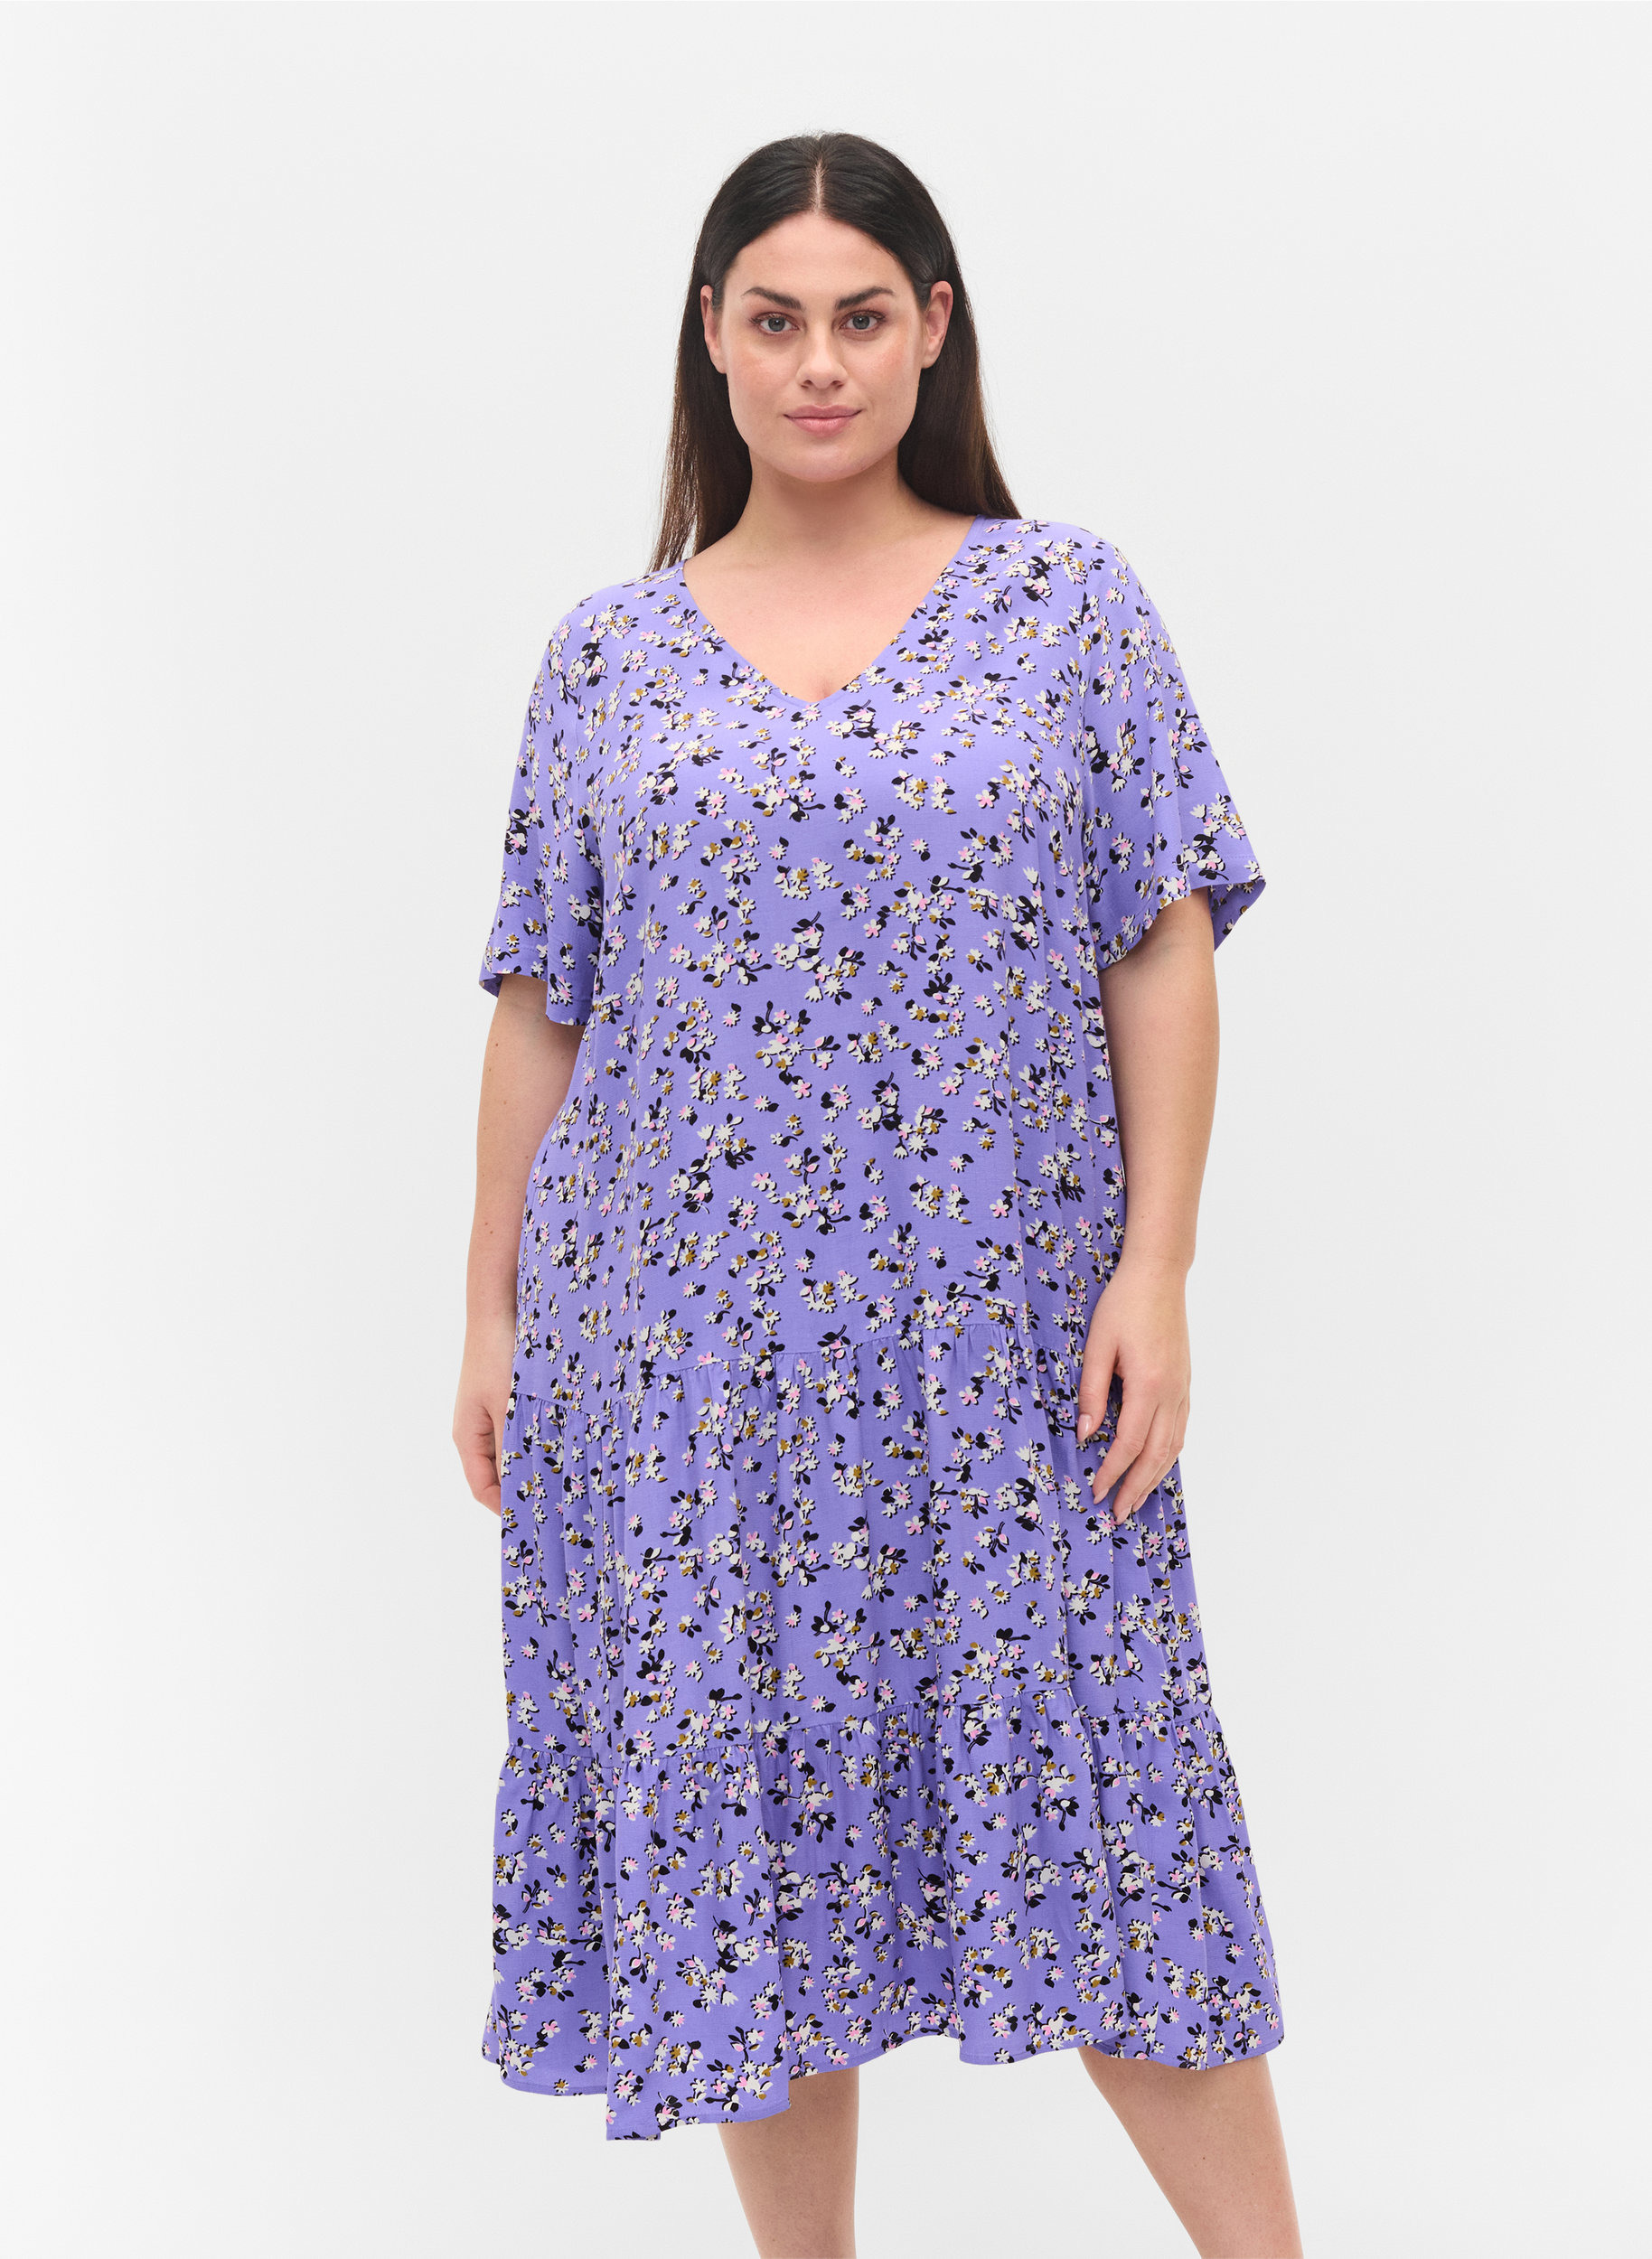 Short sleeved viscose midi dress with floral print, Lilac Flower Print, Model